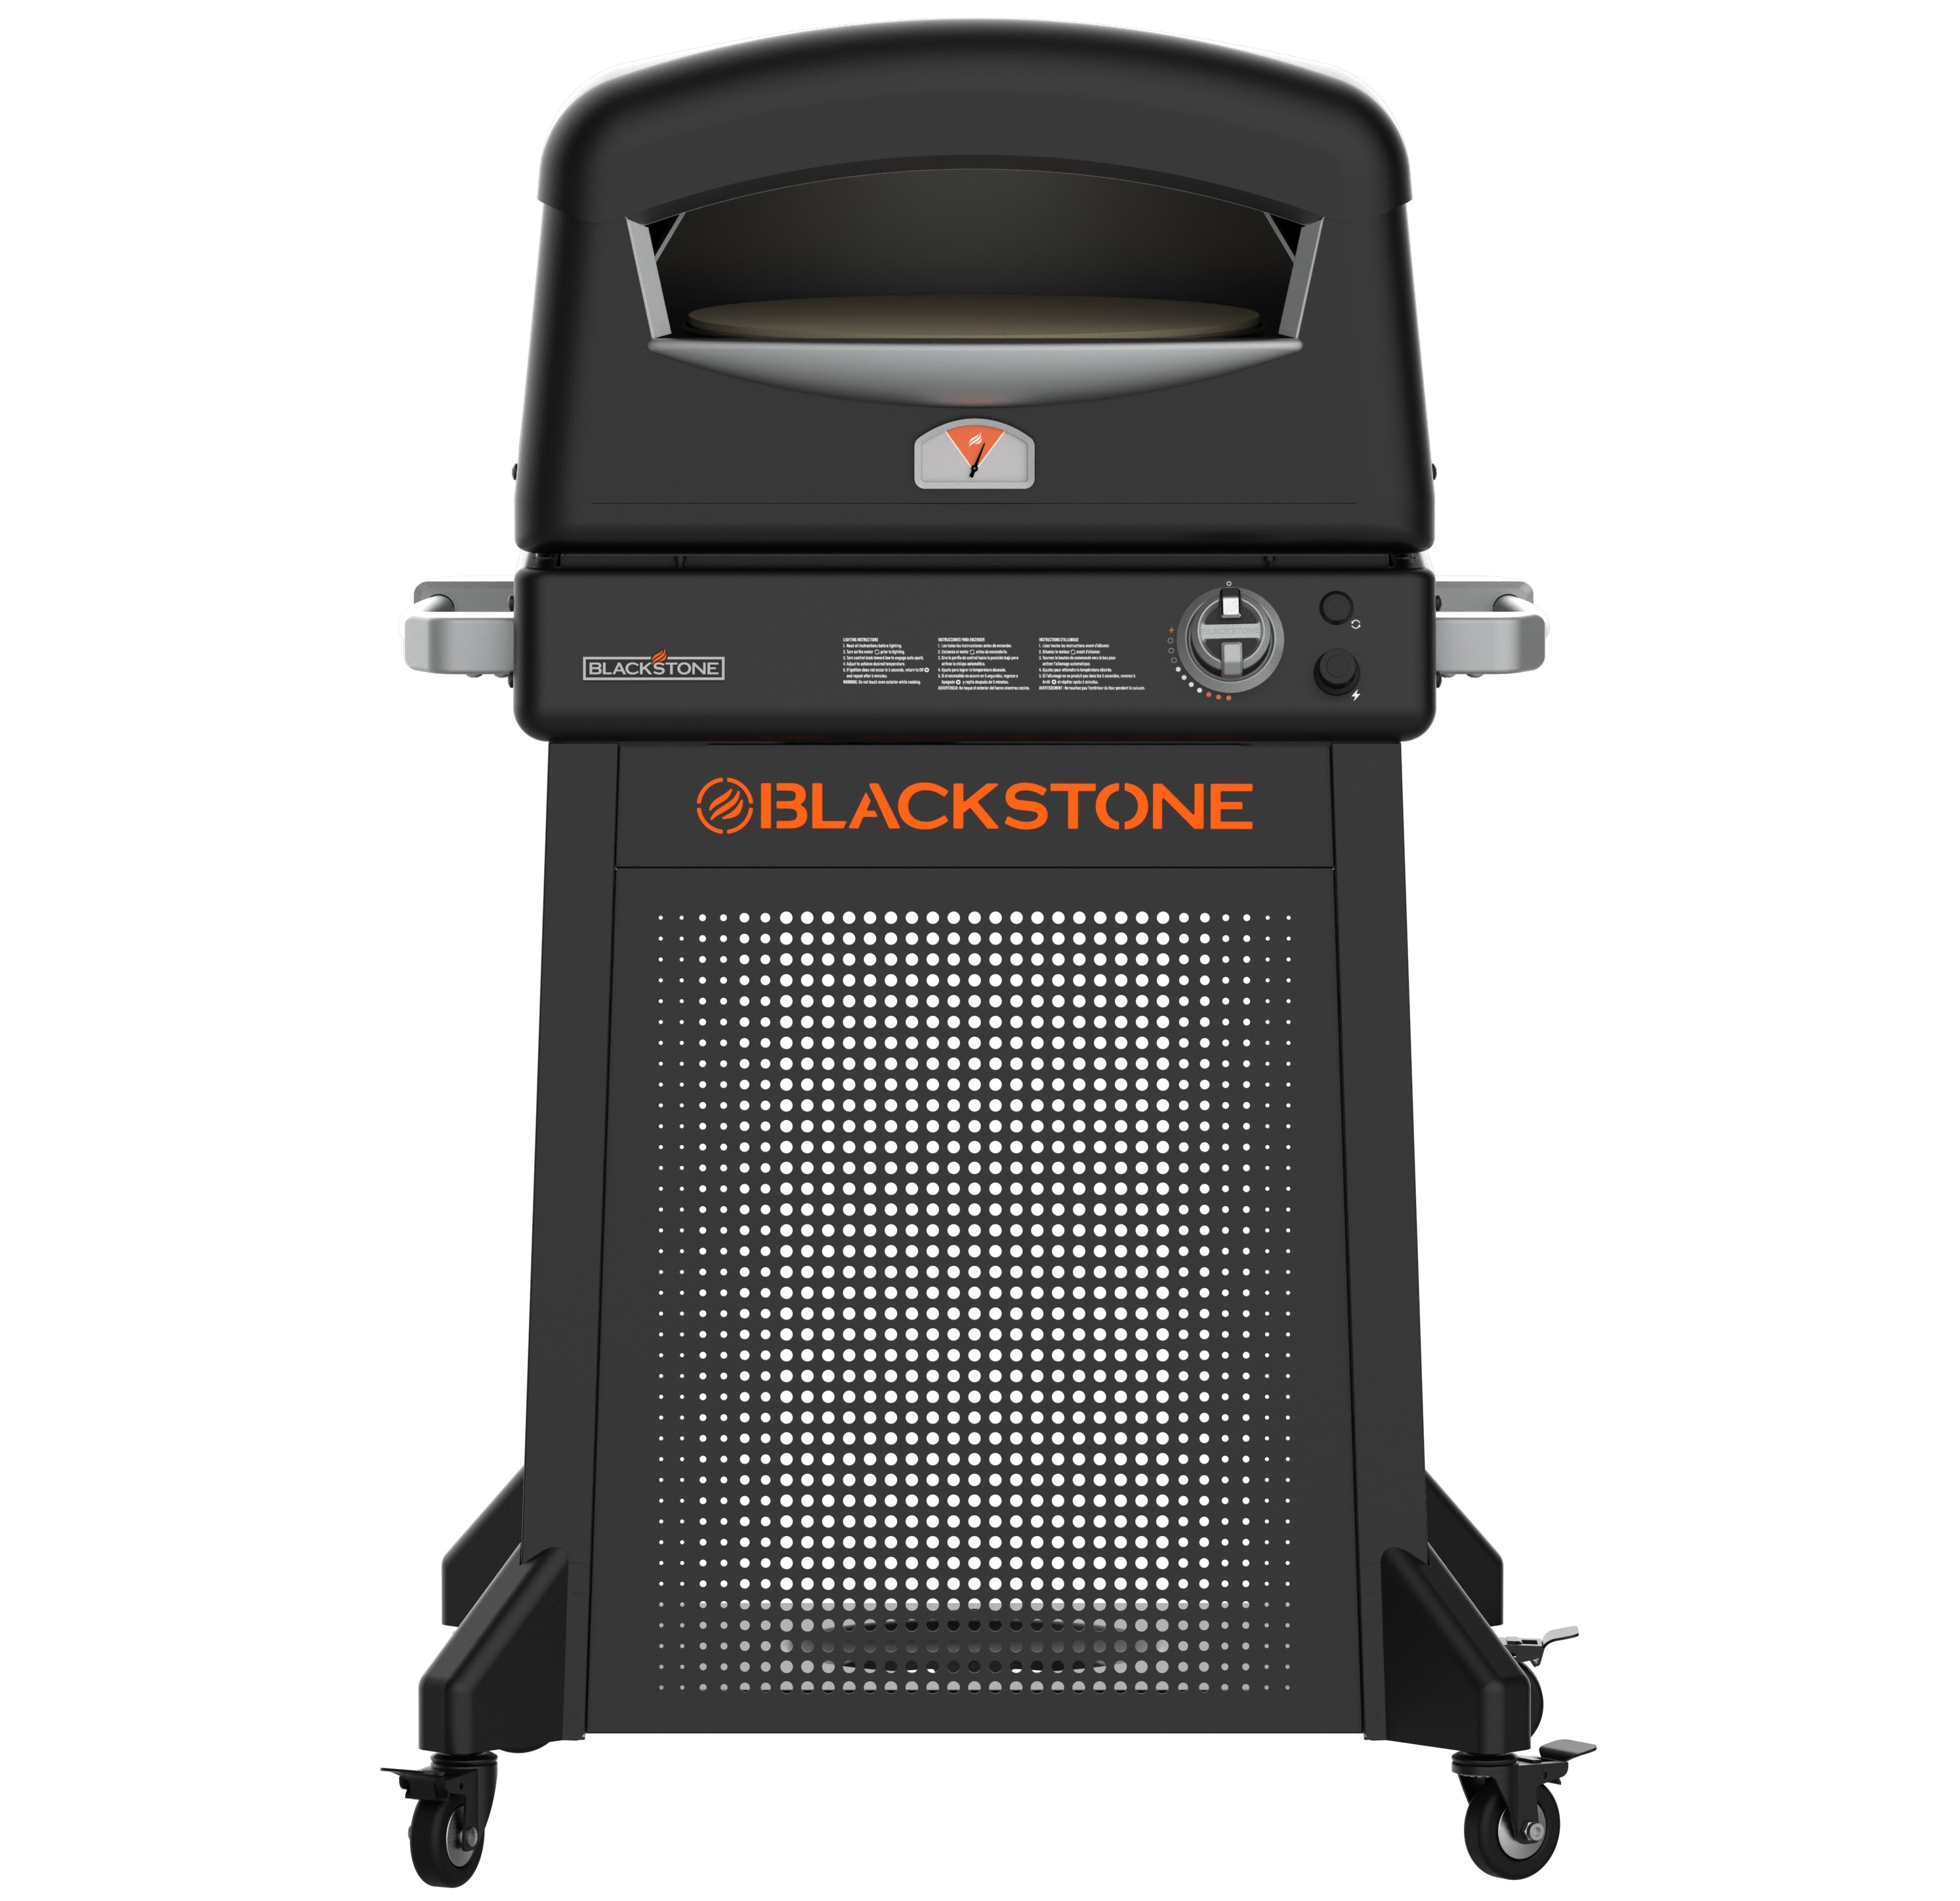 Blackstone Pizza Oven With Stand Reviewed and Rated